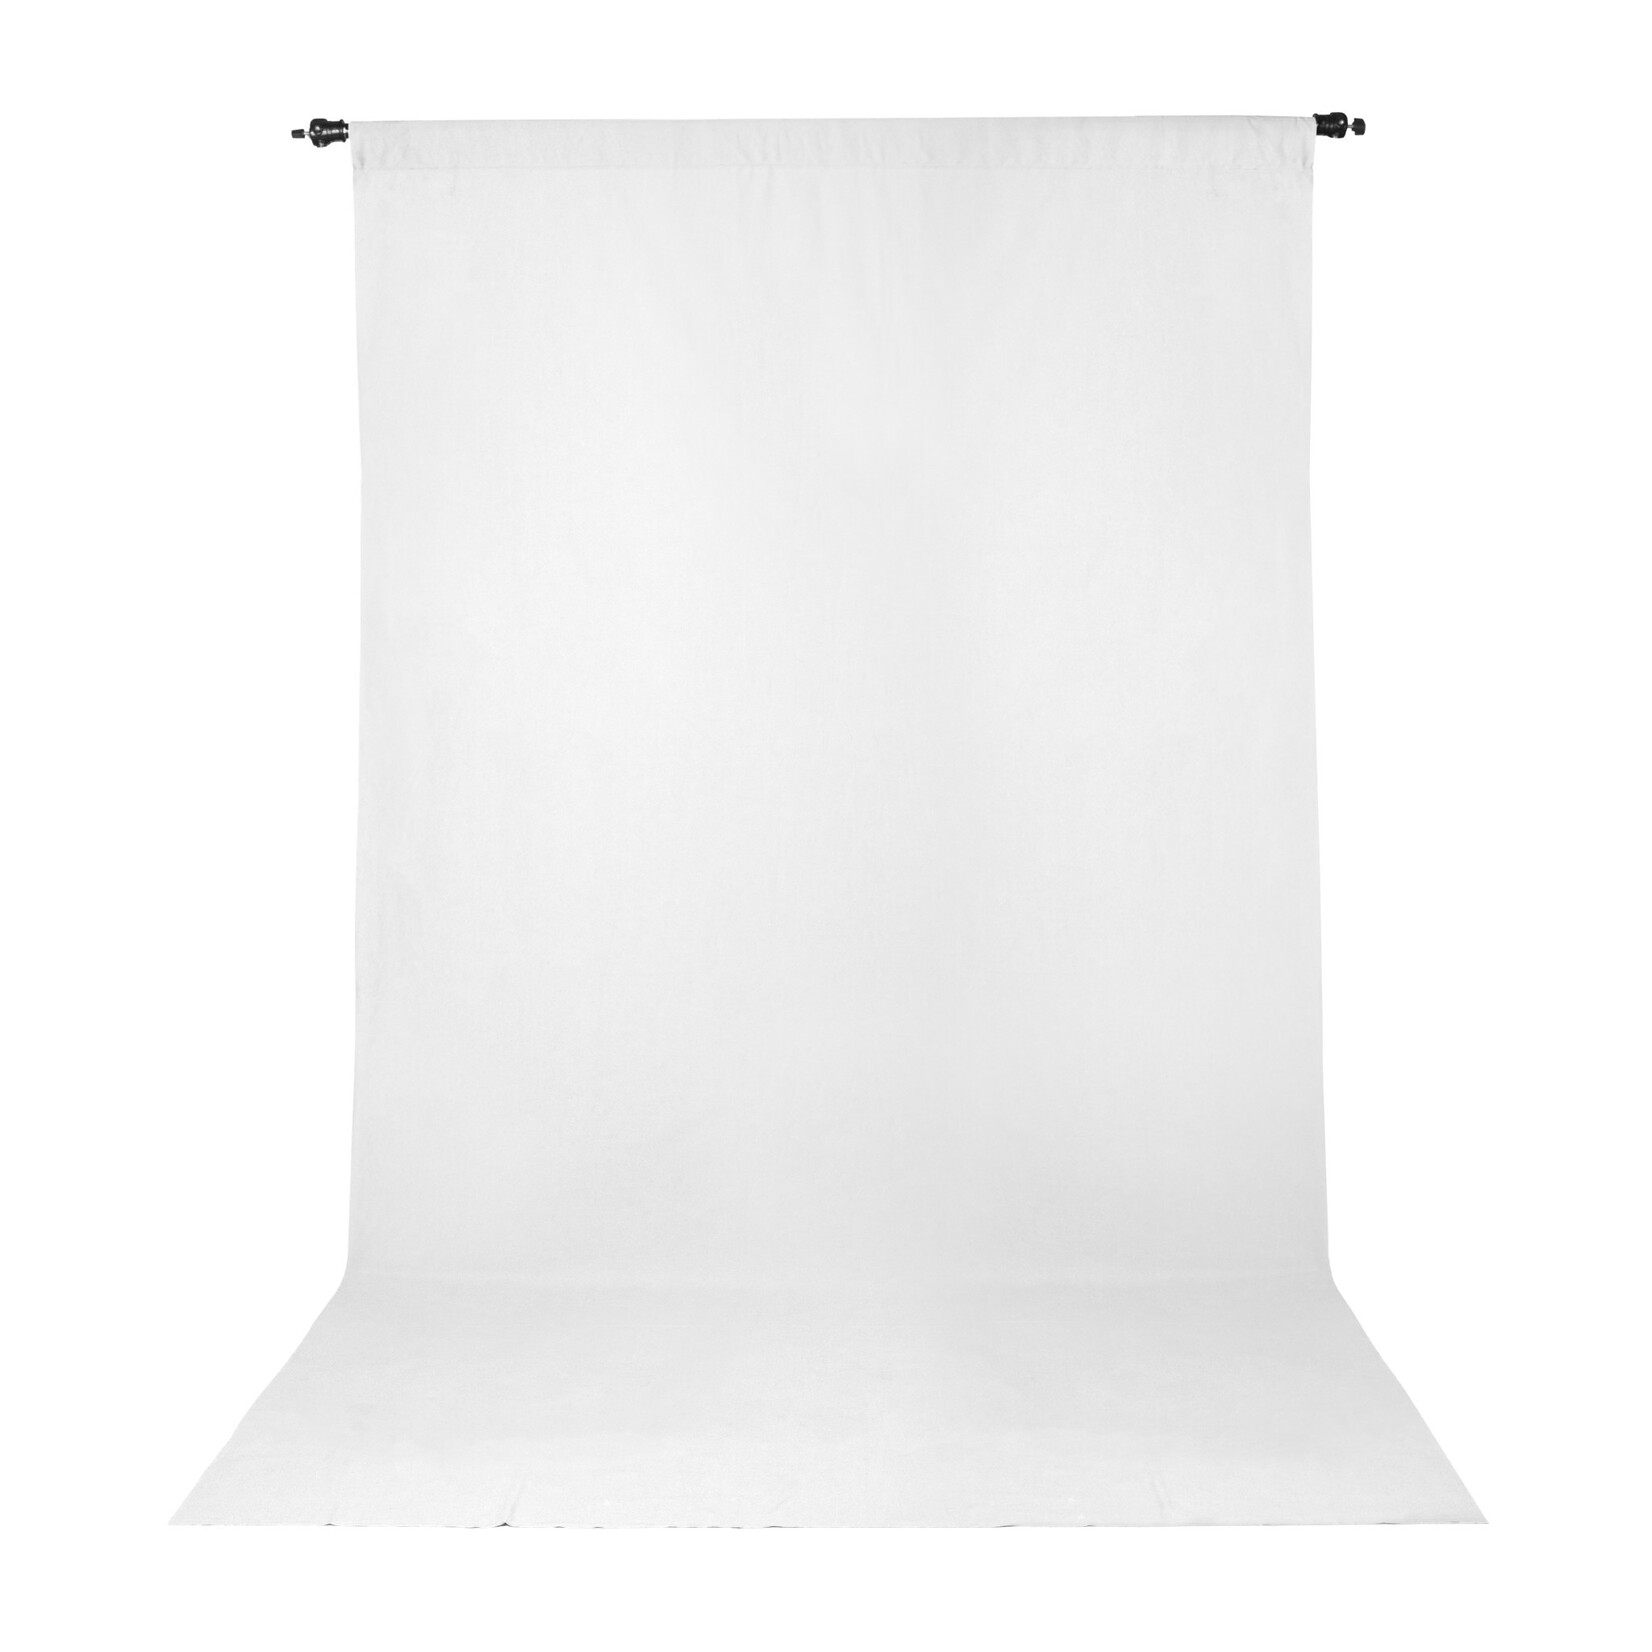 Promaster 10ft x 12ft White Wrinkle Resistant PRO Background Fabric